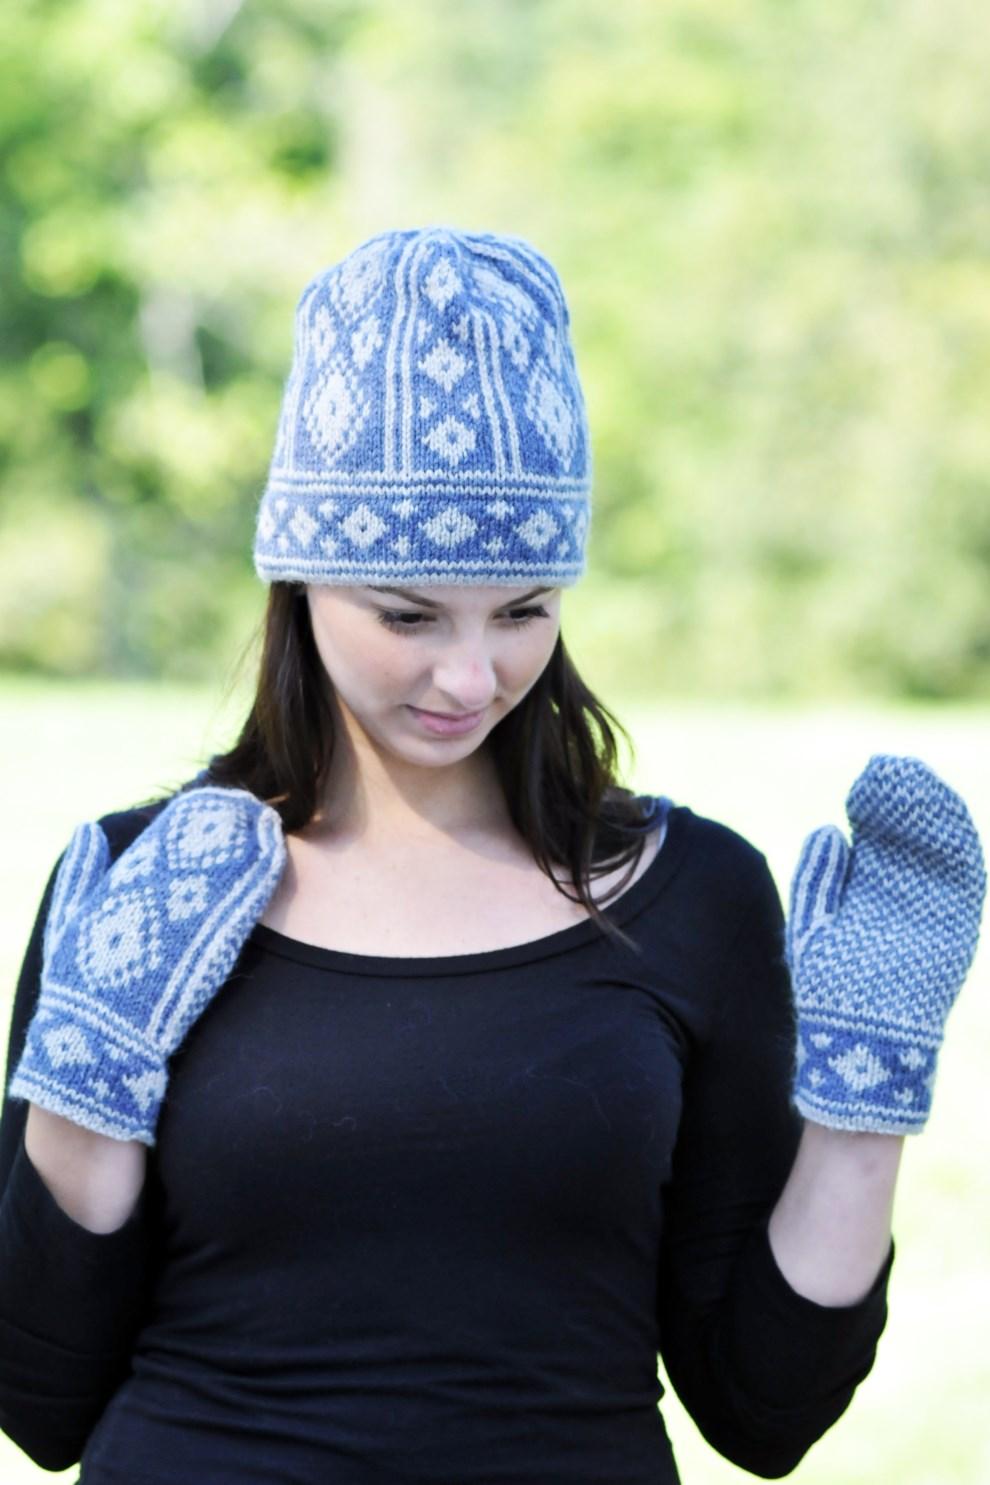 Alpaca Lana D Oro Arctic Set Designed by Diane Zangl Fair Isle motifs go vertical in this winter set. The hat is shaped at the top by means of equally spaced decreases.